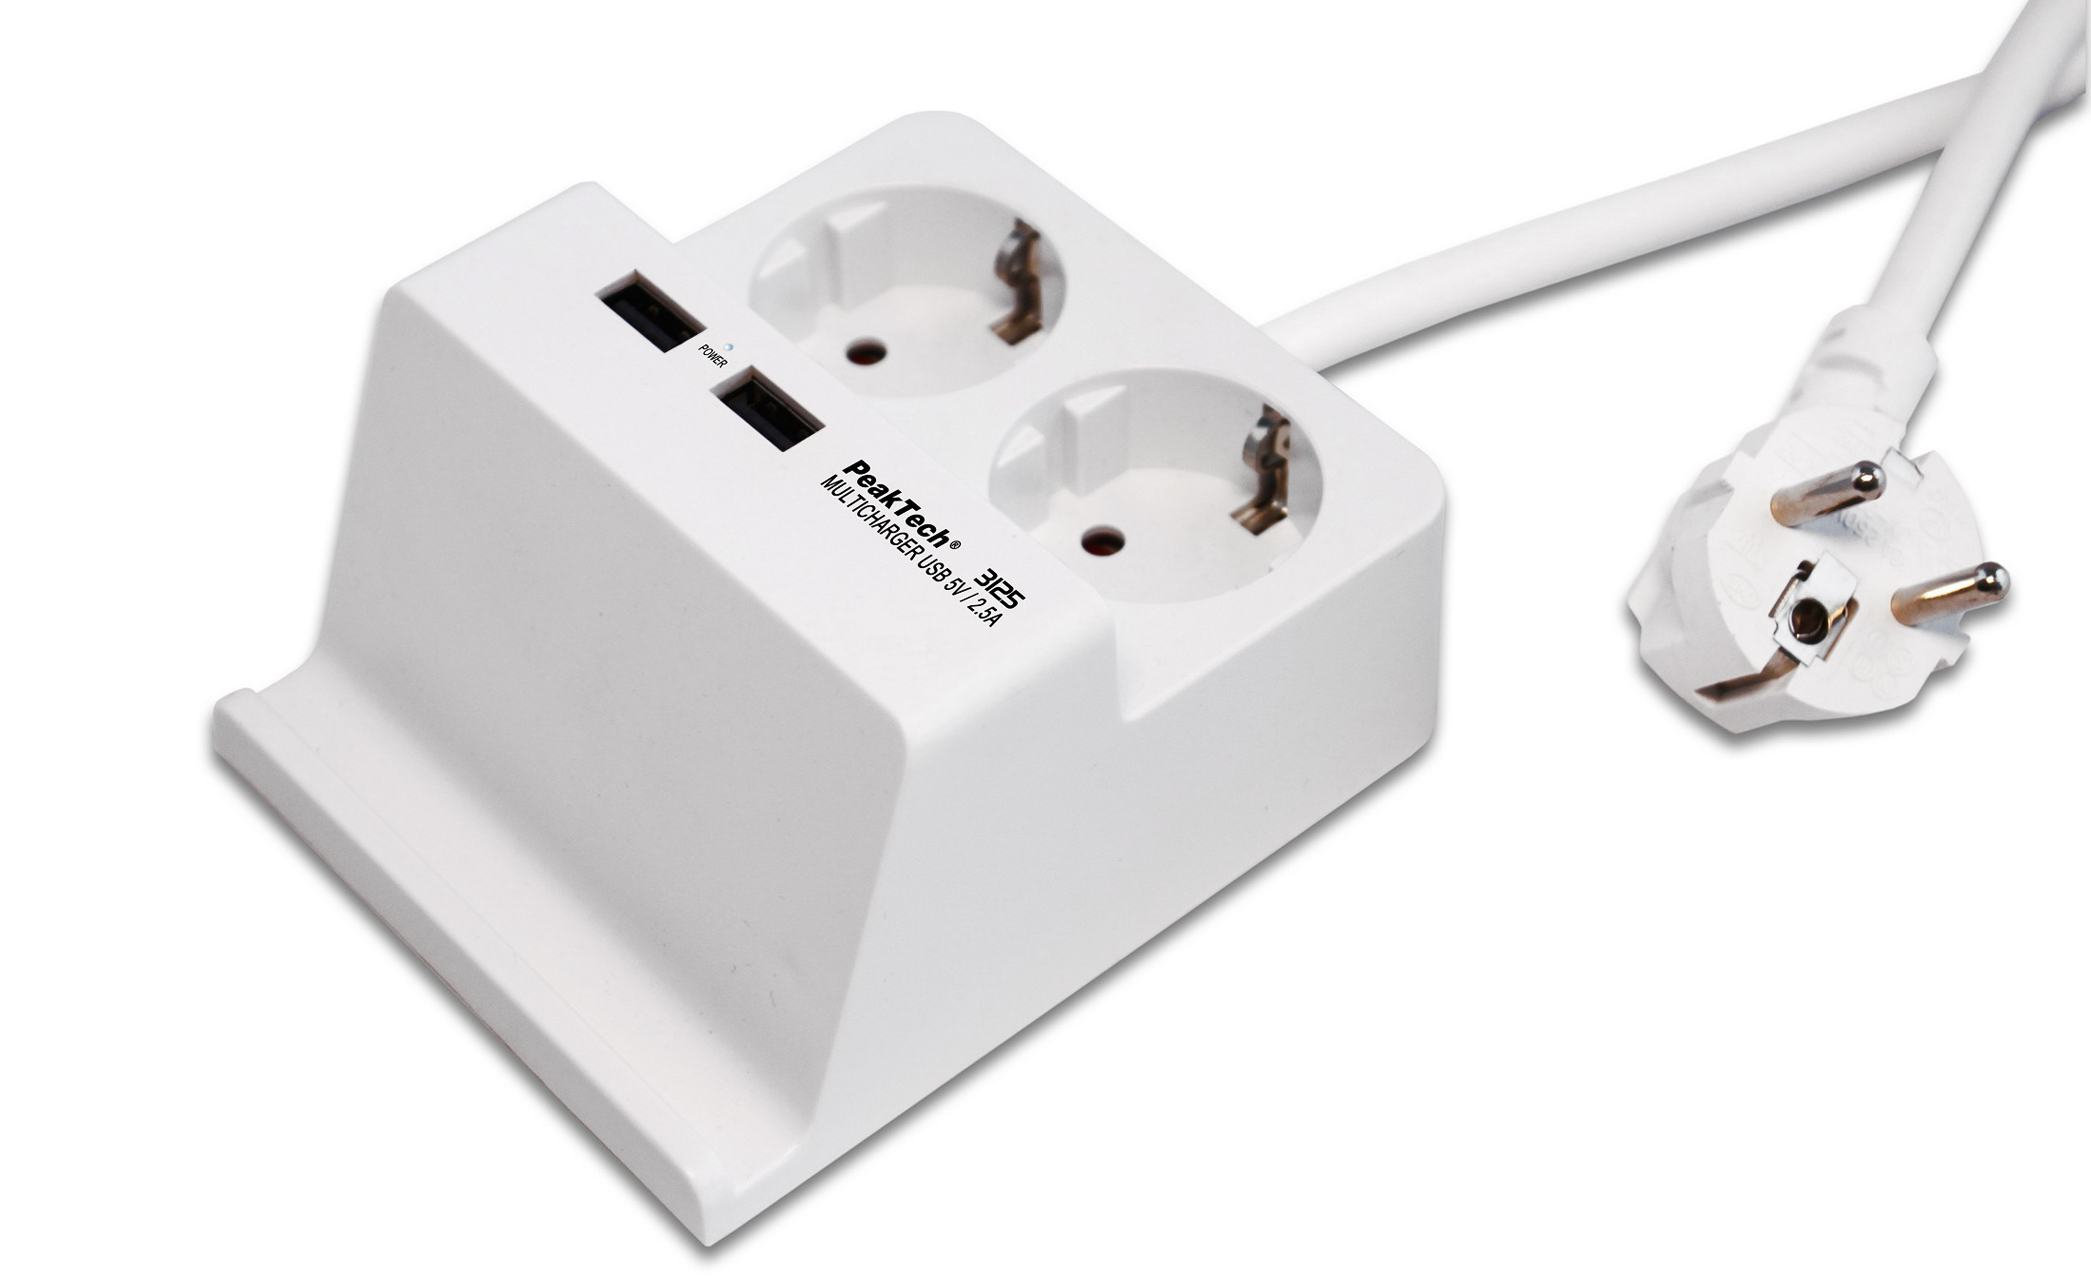 «PeakTech® P 3125» 2 x 230 V Schuko and 2 x USB charger with 2.5 A